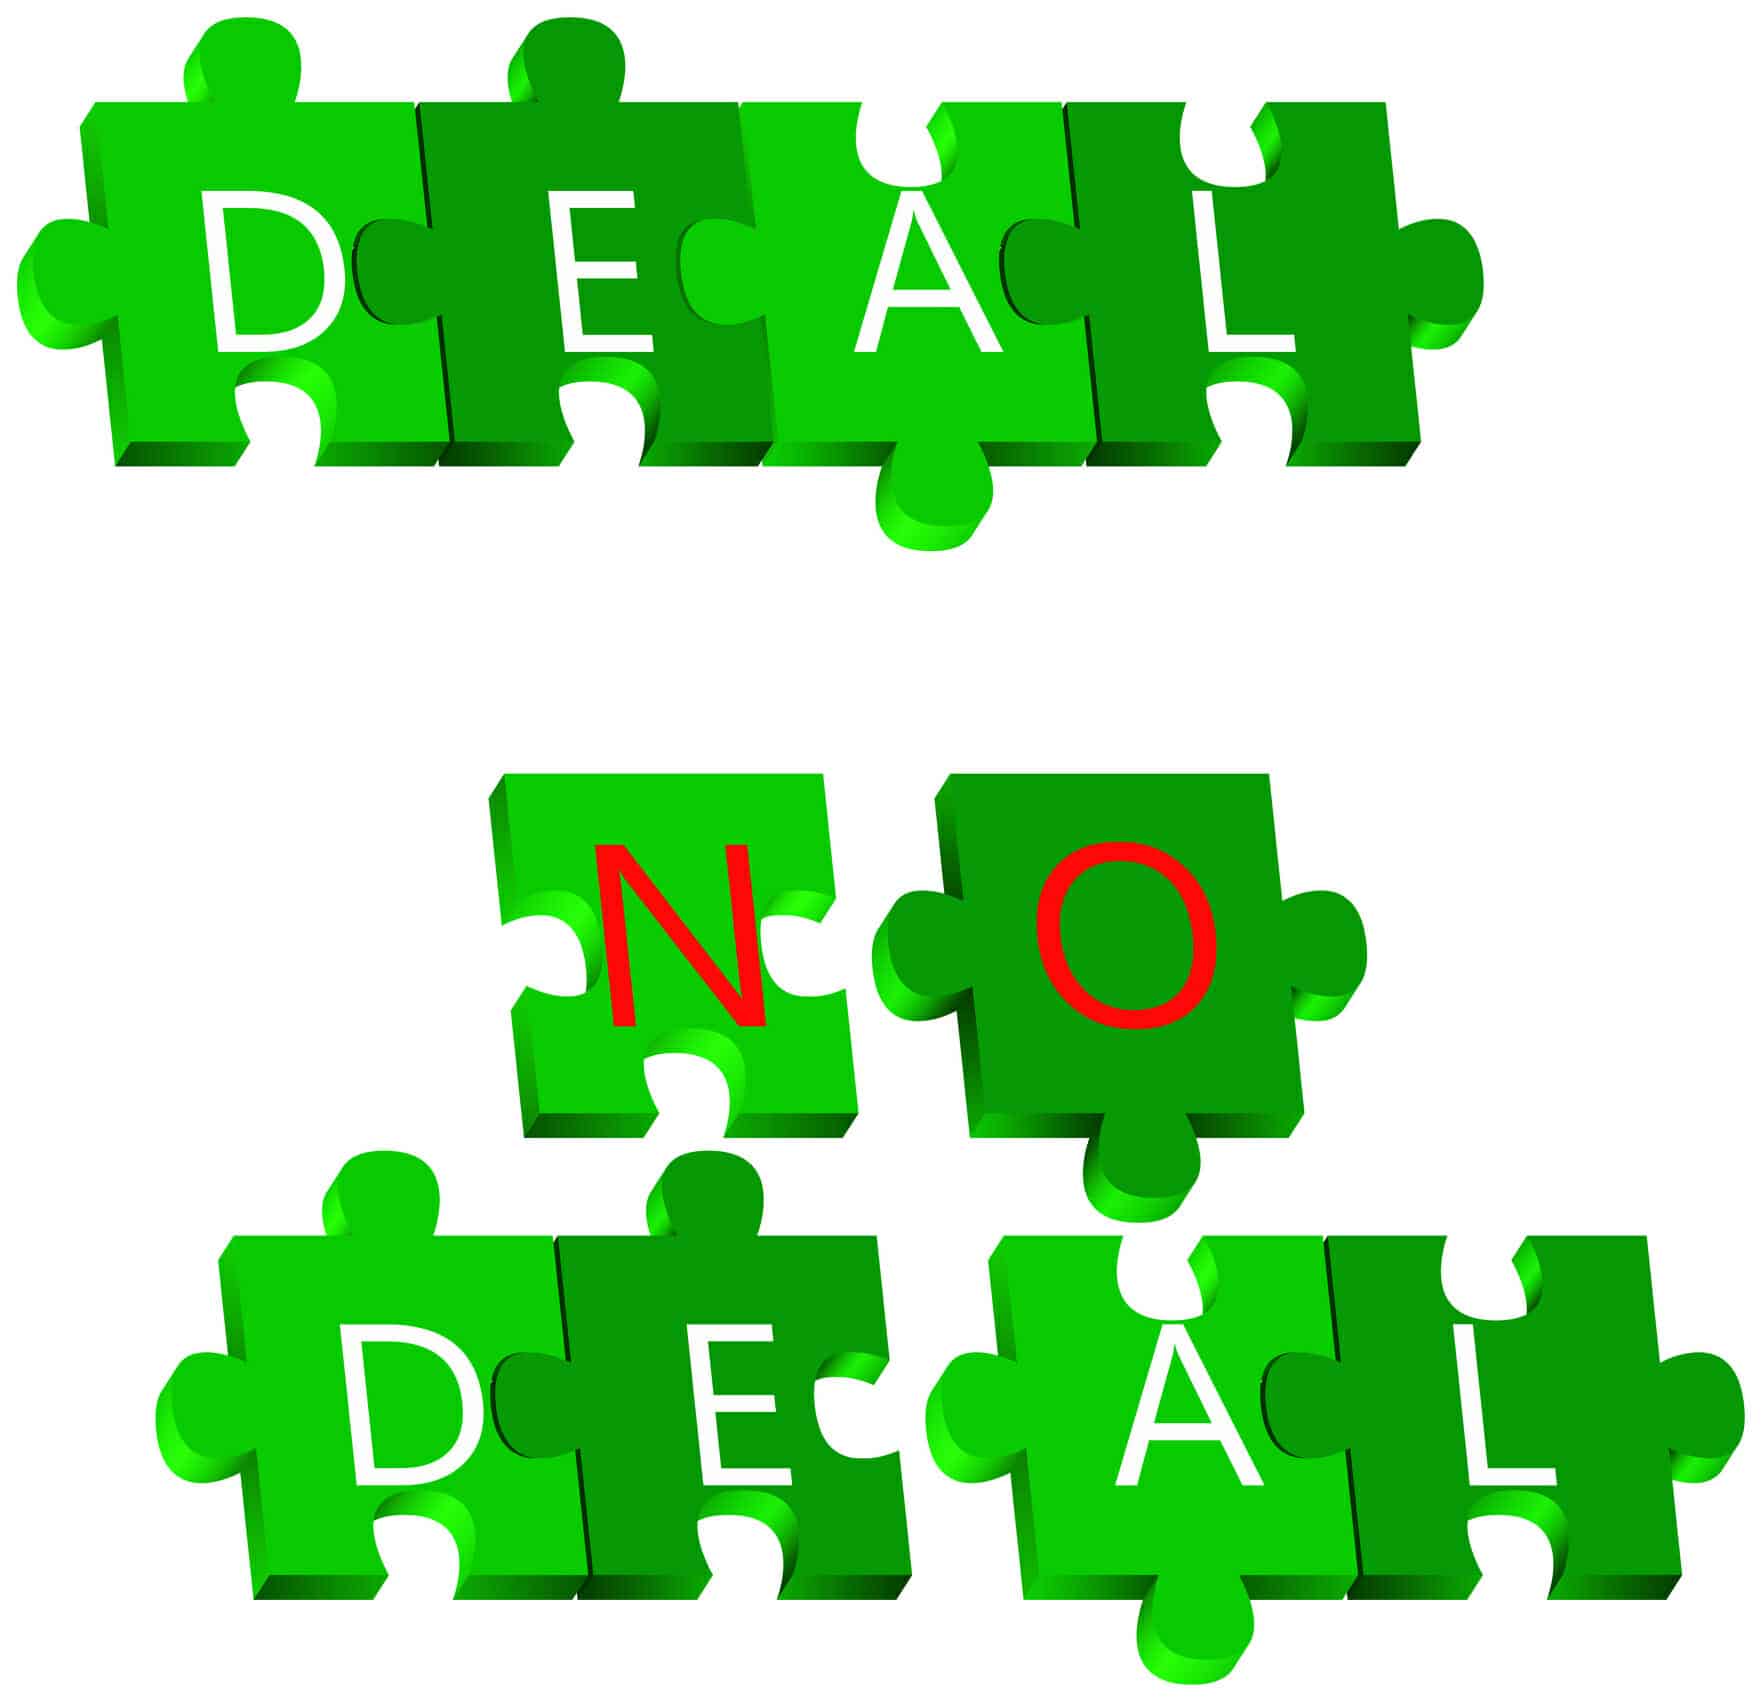 Green puzzle pieces with letters on them that spell "Deal No Deal"